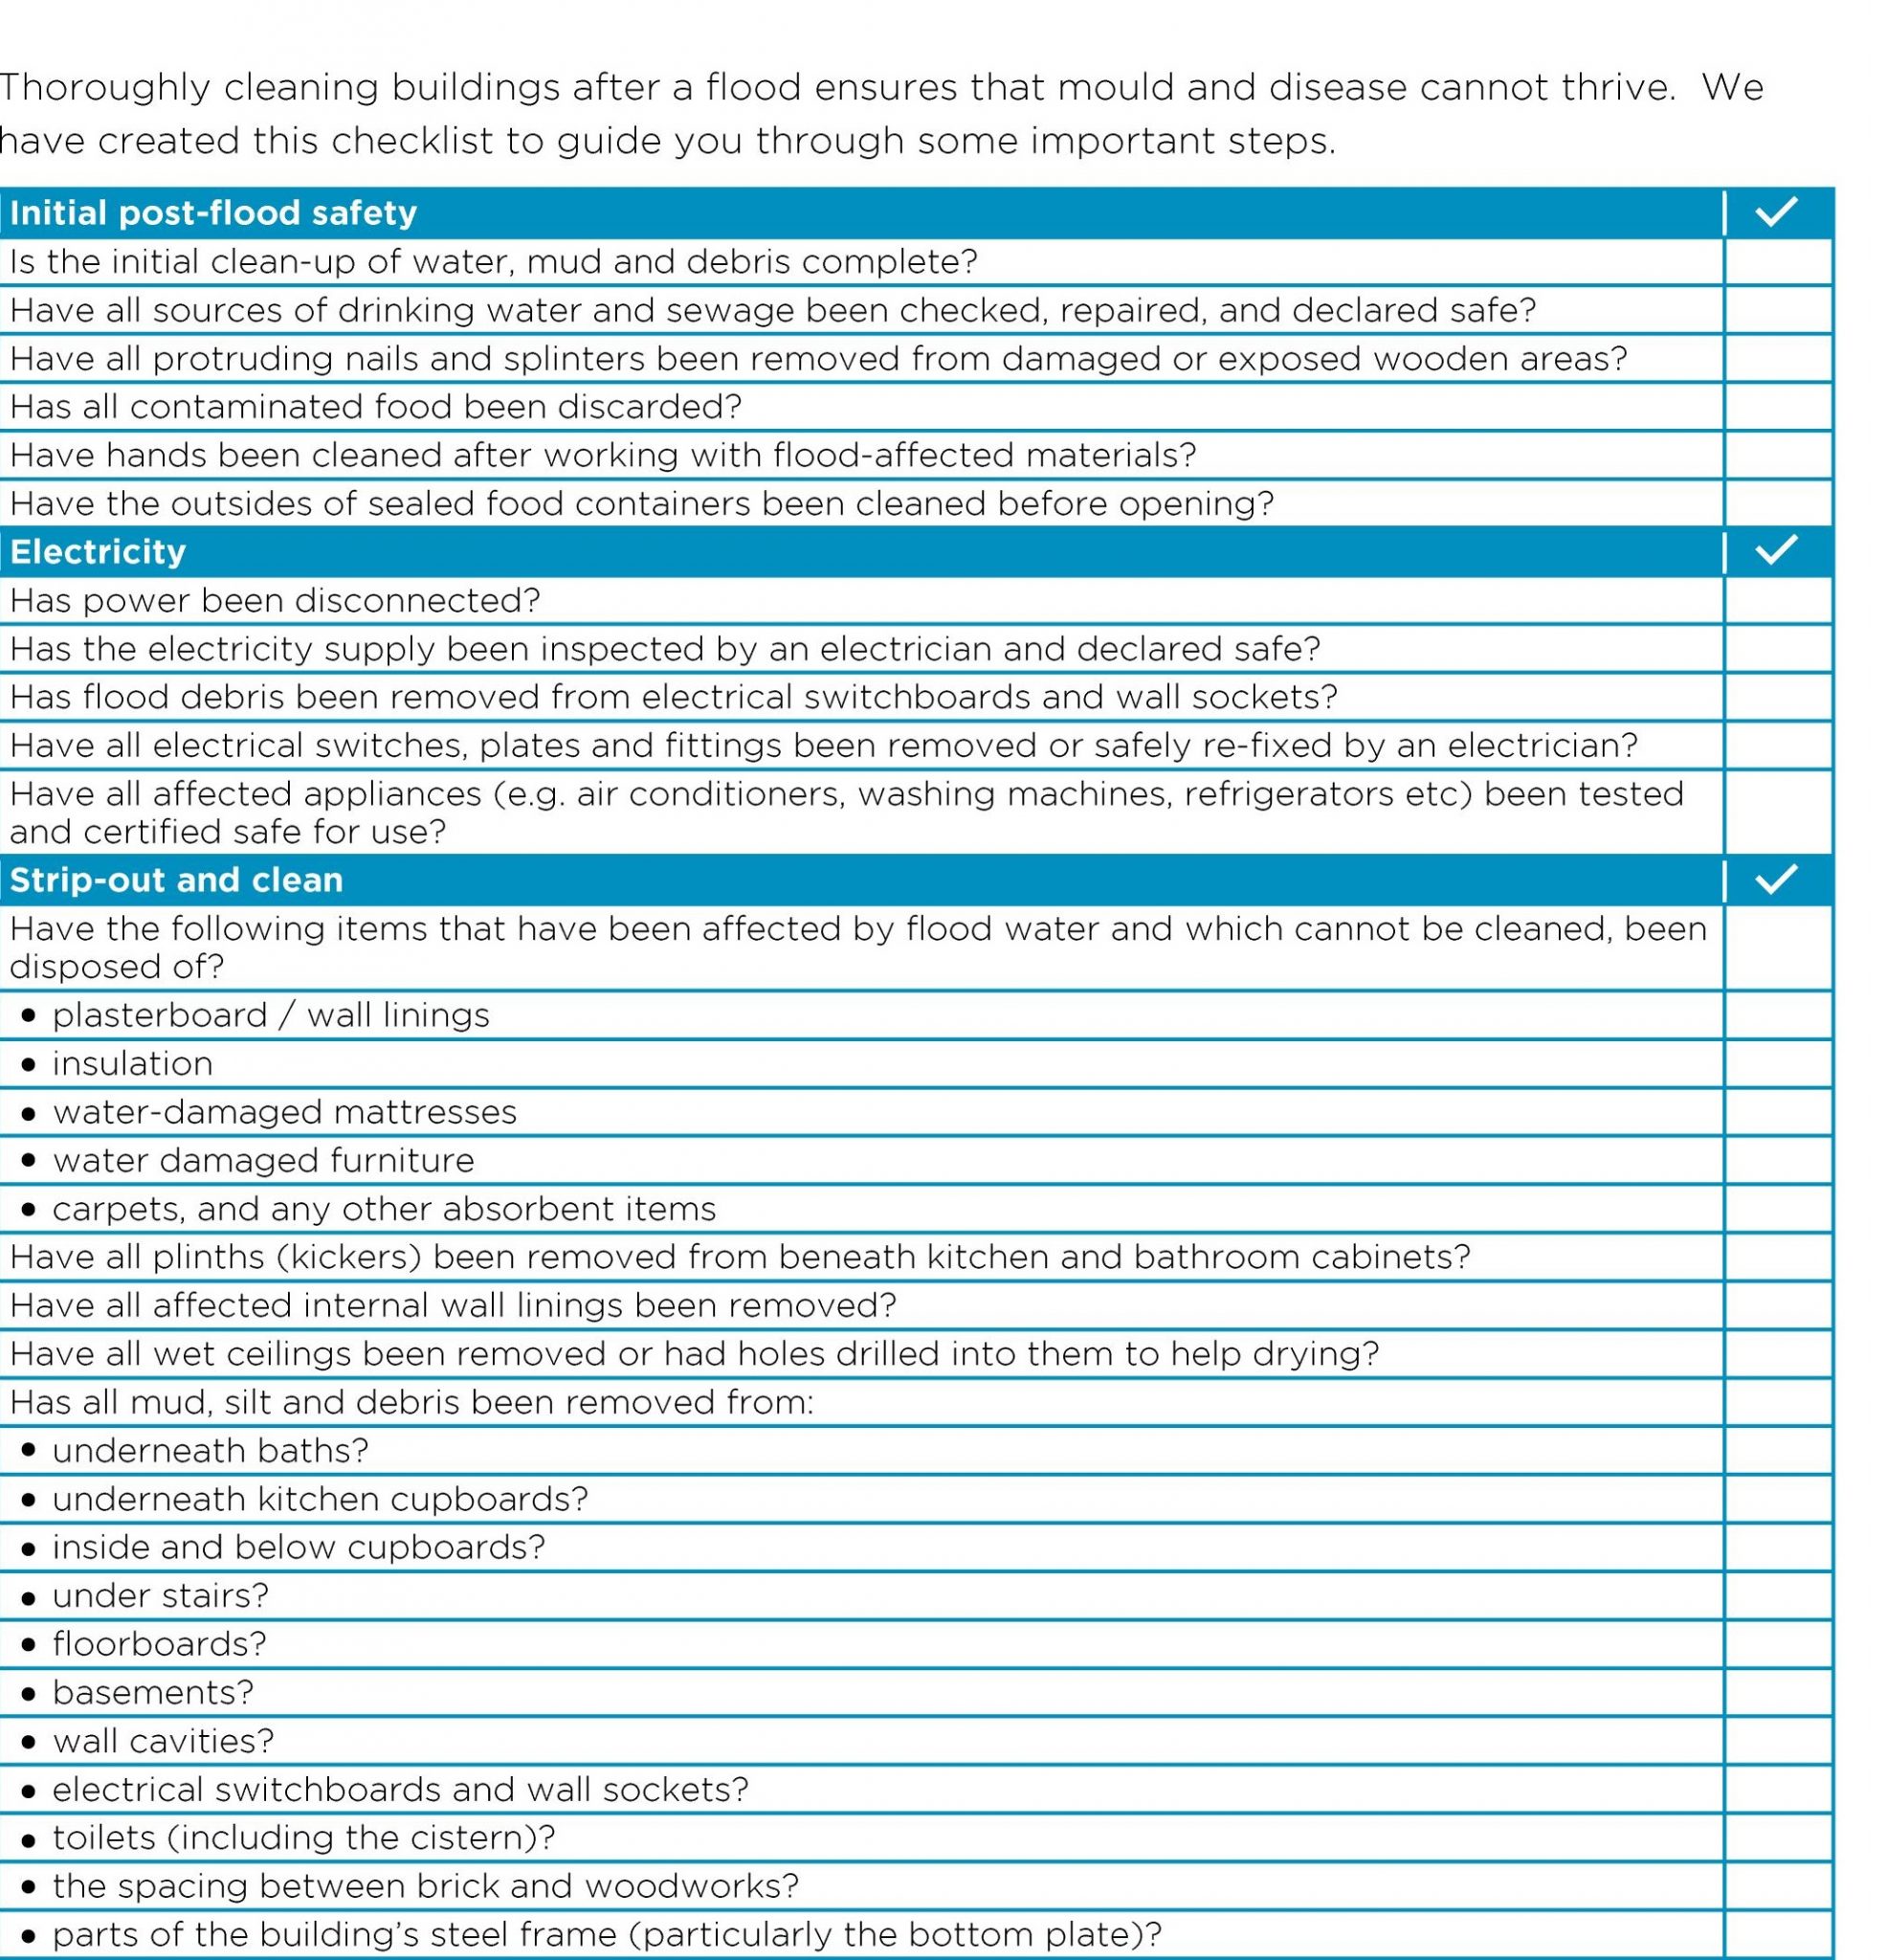 Floods - Health and Safety Checklist - Smart Strata | Body Corporate ...